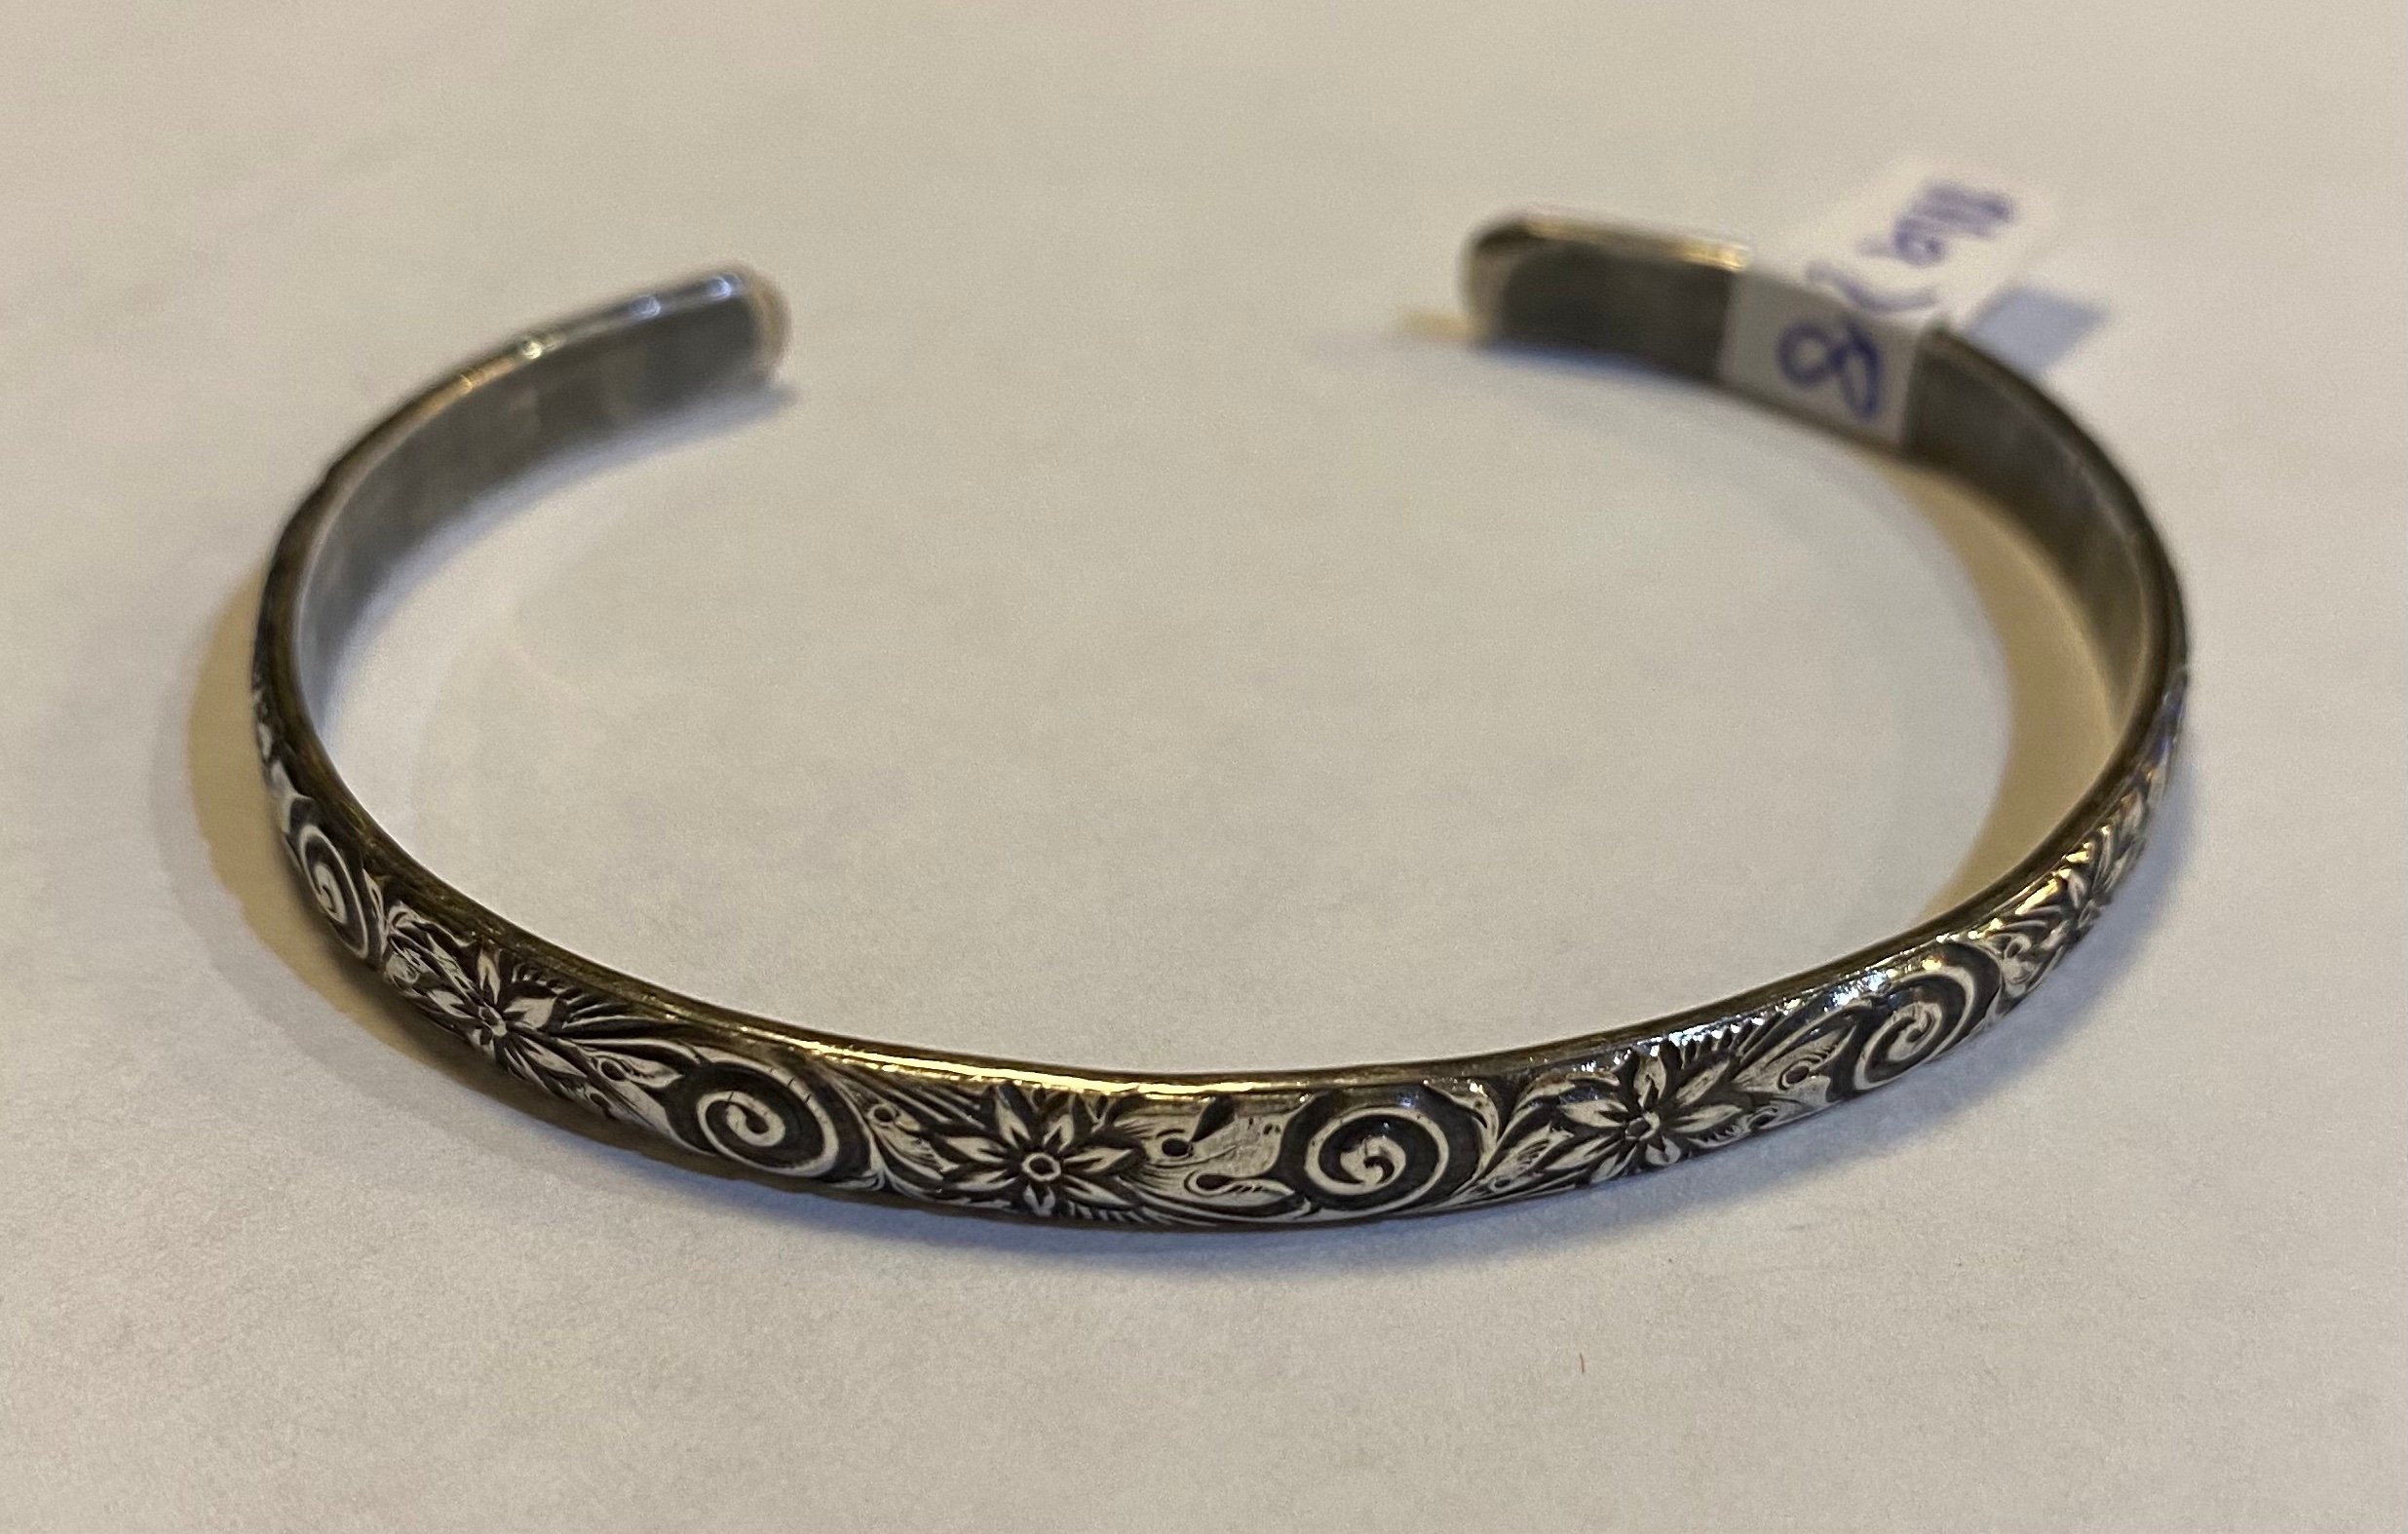 Patterned Cuff   Ma78
Sterling Silver
$40.